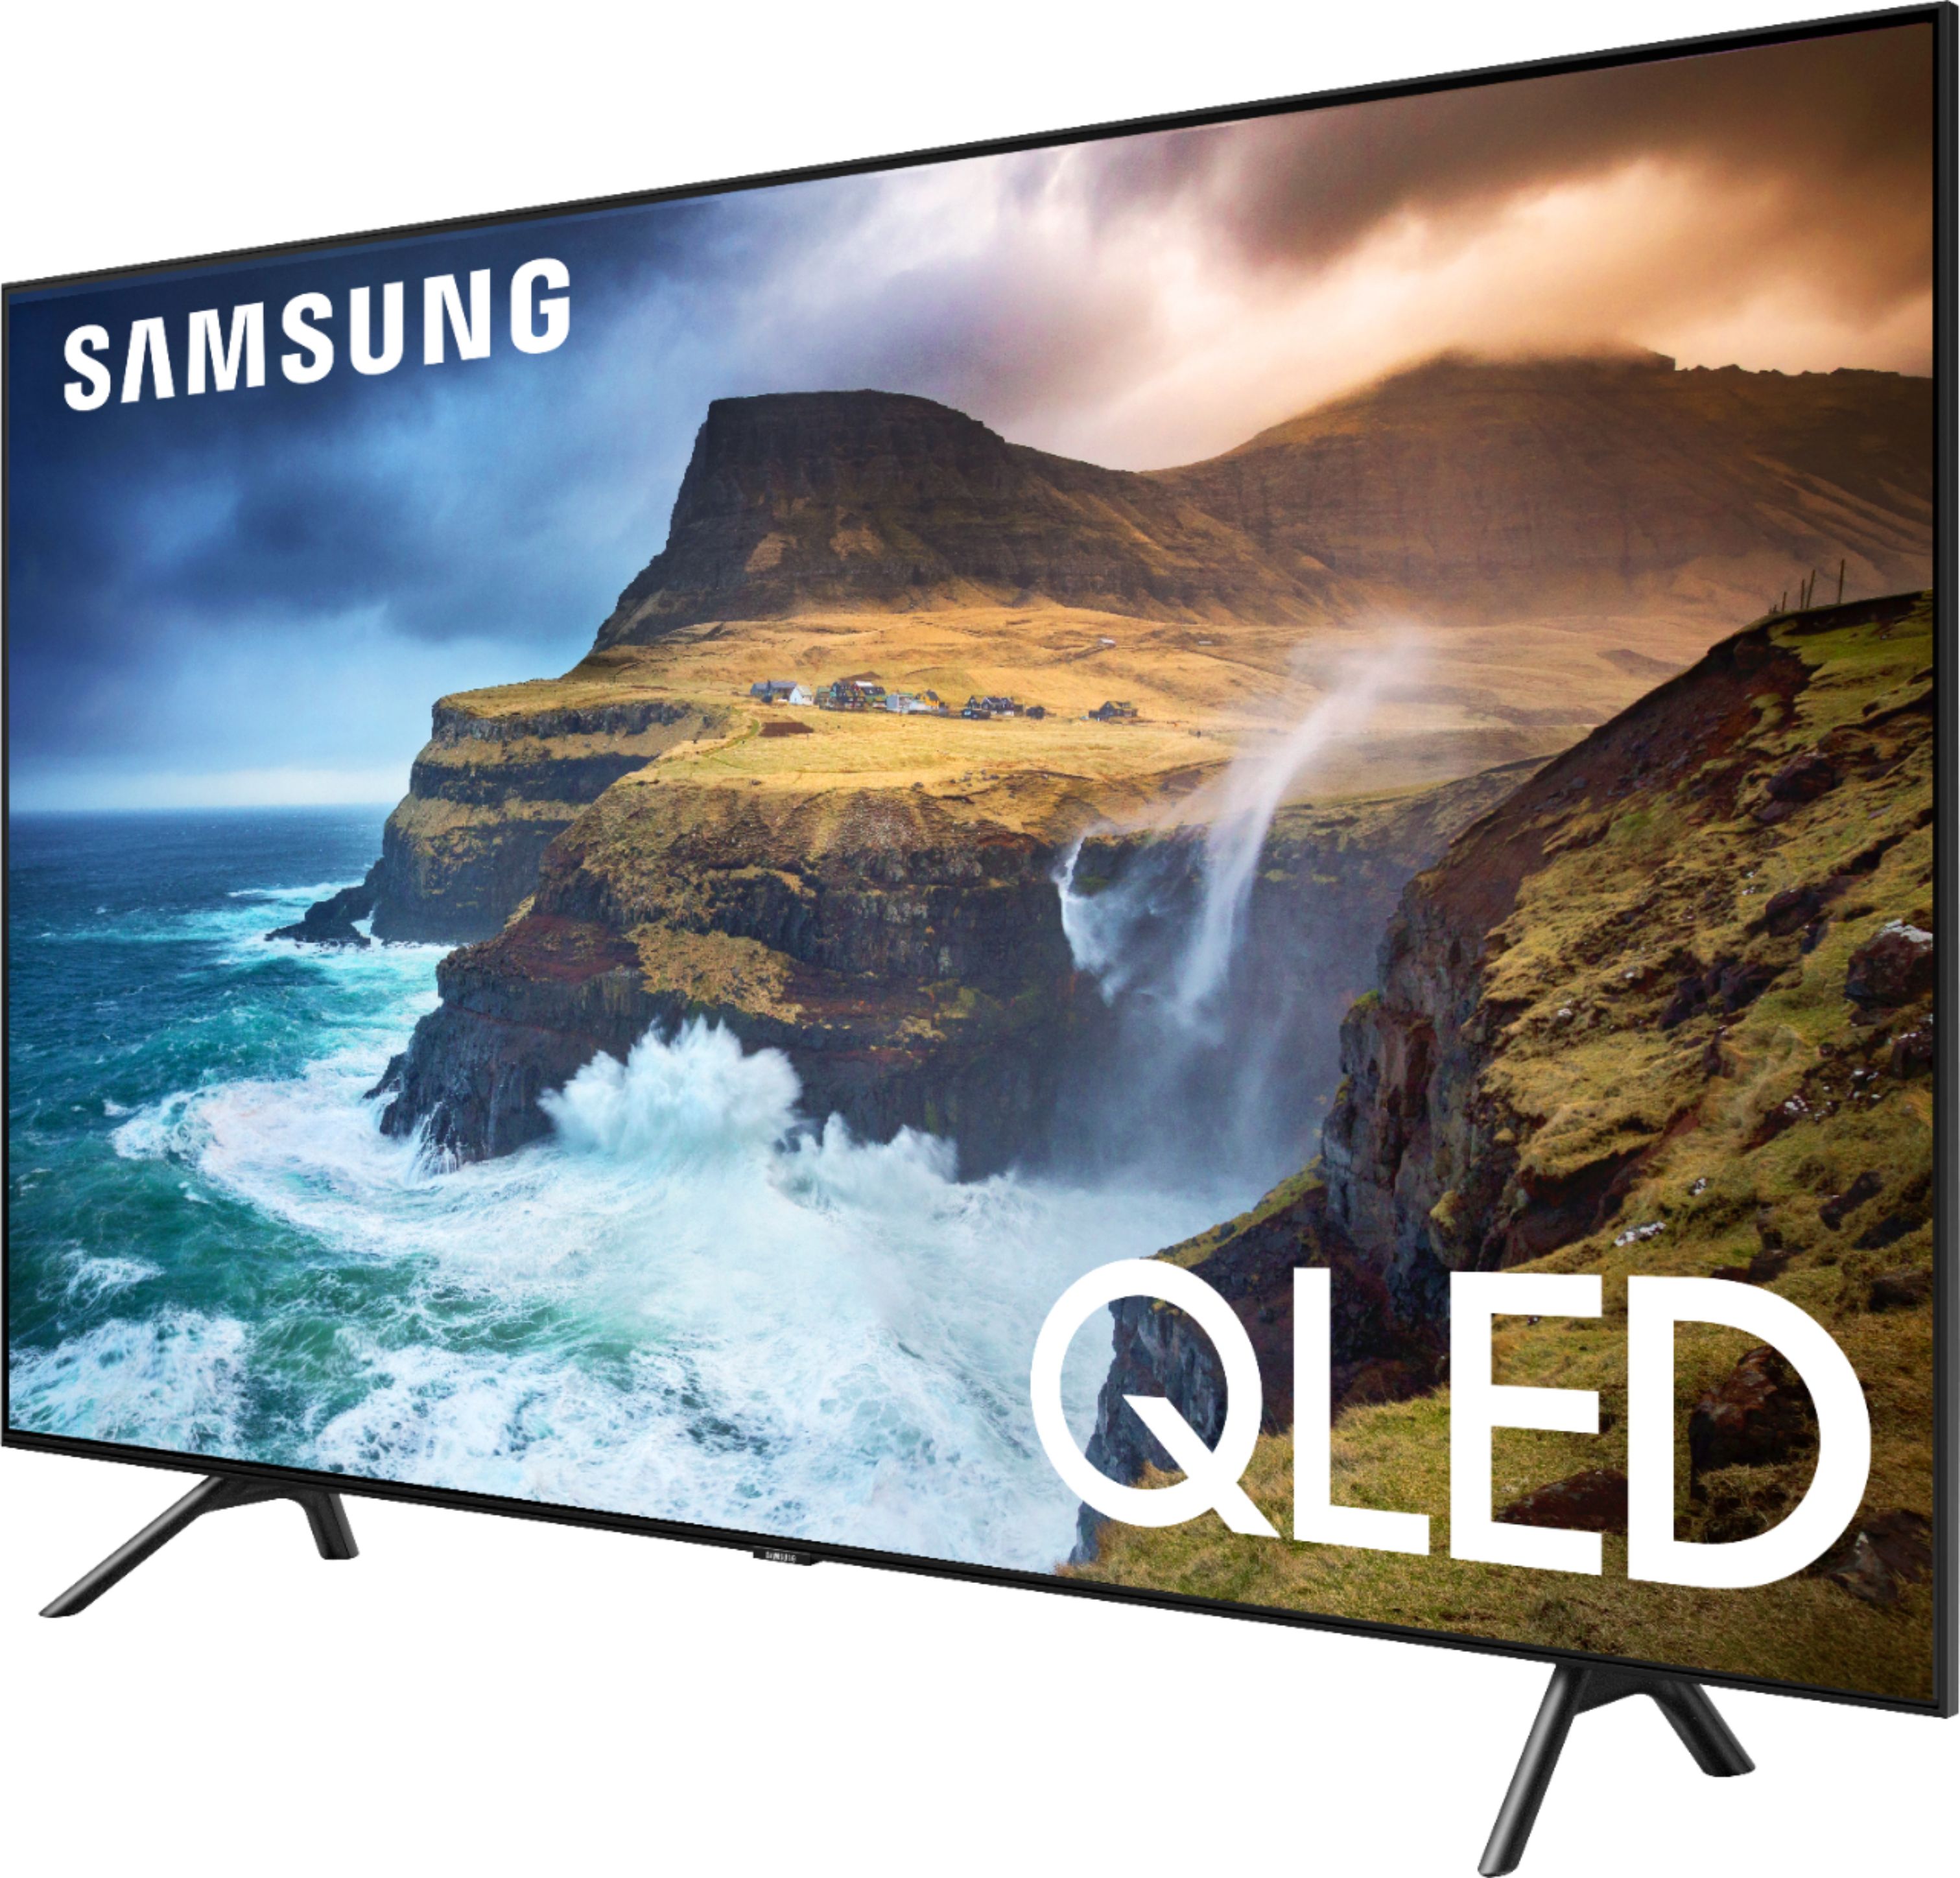 Questions And Answers Samsung 85 Class Led Q70 Series 2160p Smart 4k